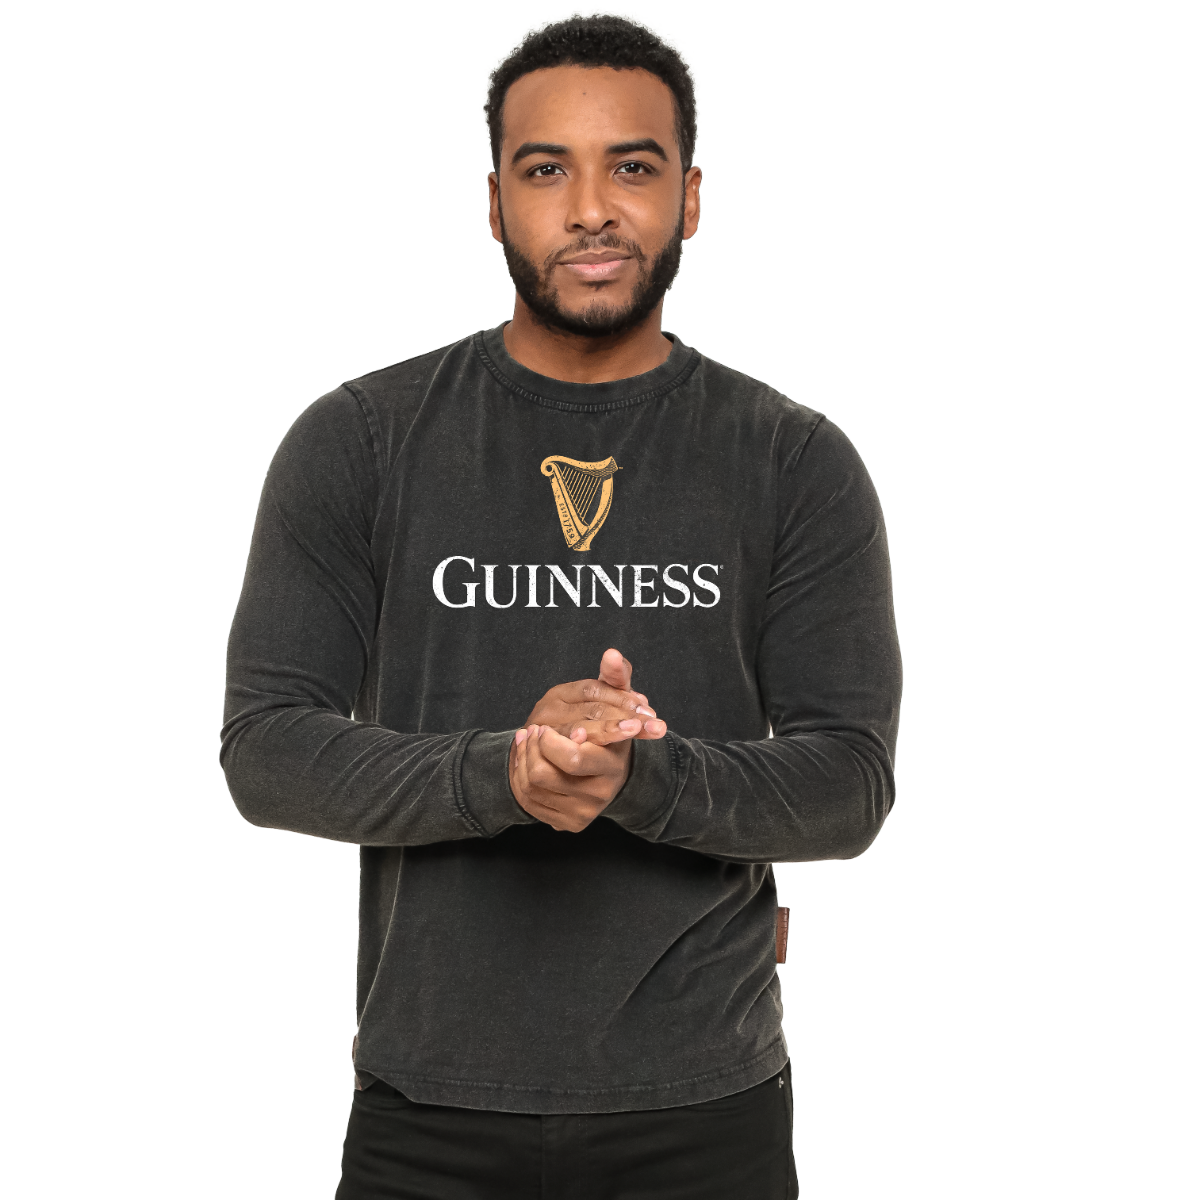 Premium Guinness men's long sleeve tee is replaced with Premium Harp Sweater by Guinness.